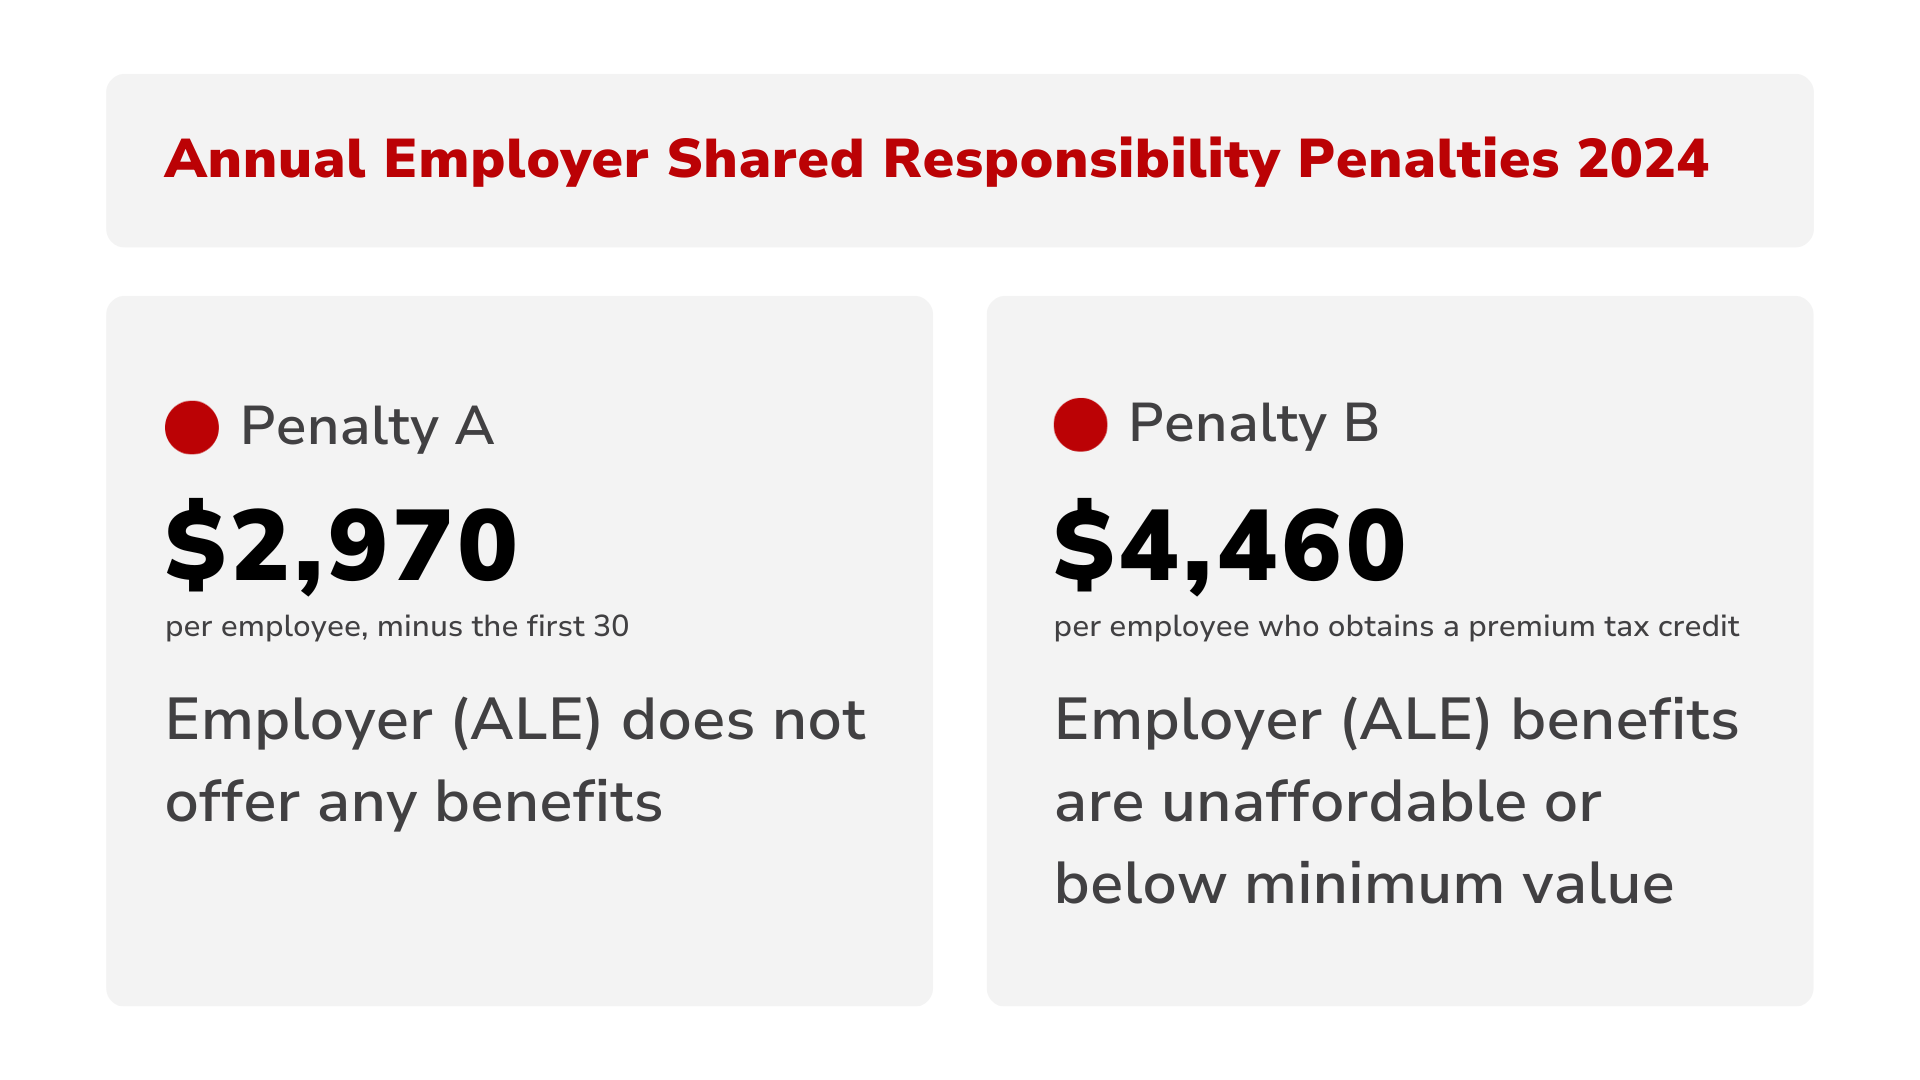 the annual employer shared responsibility penalties for 2024